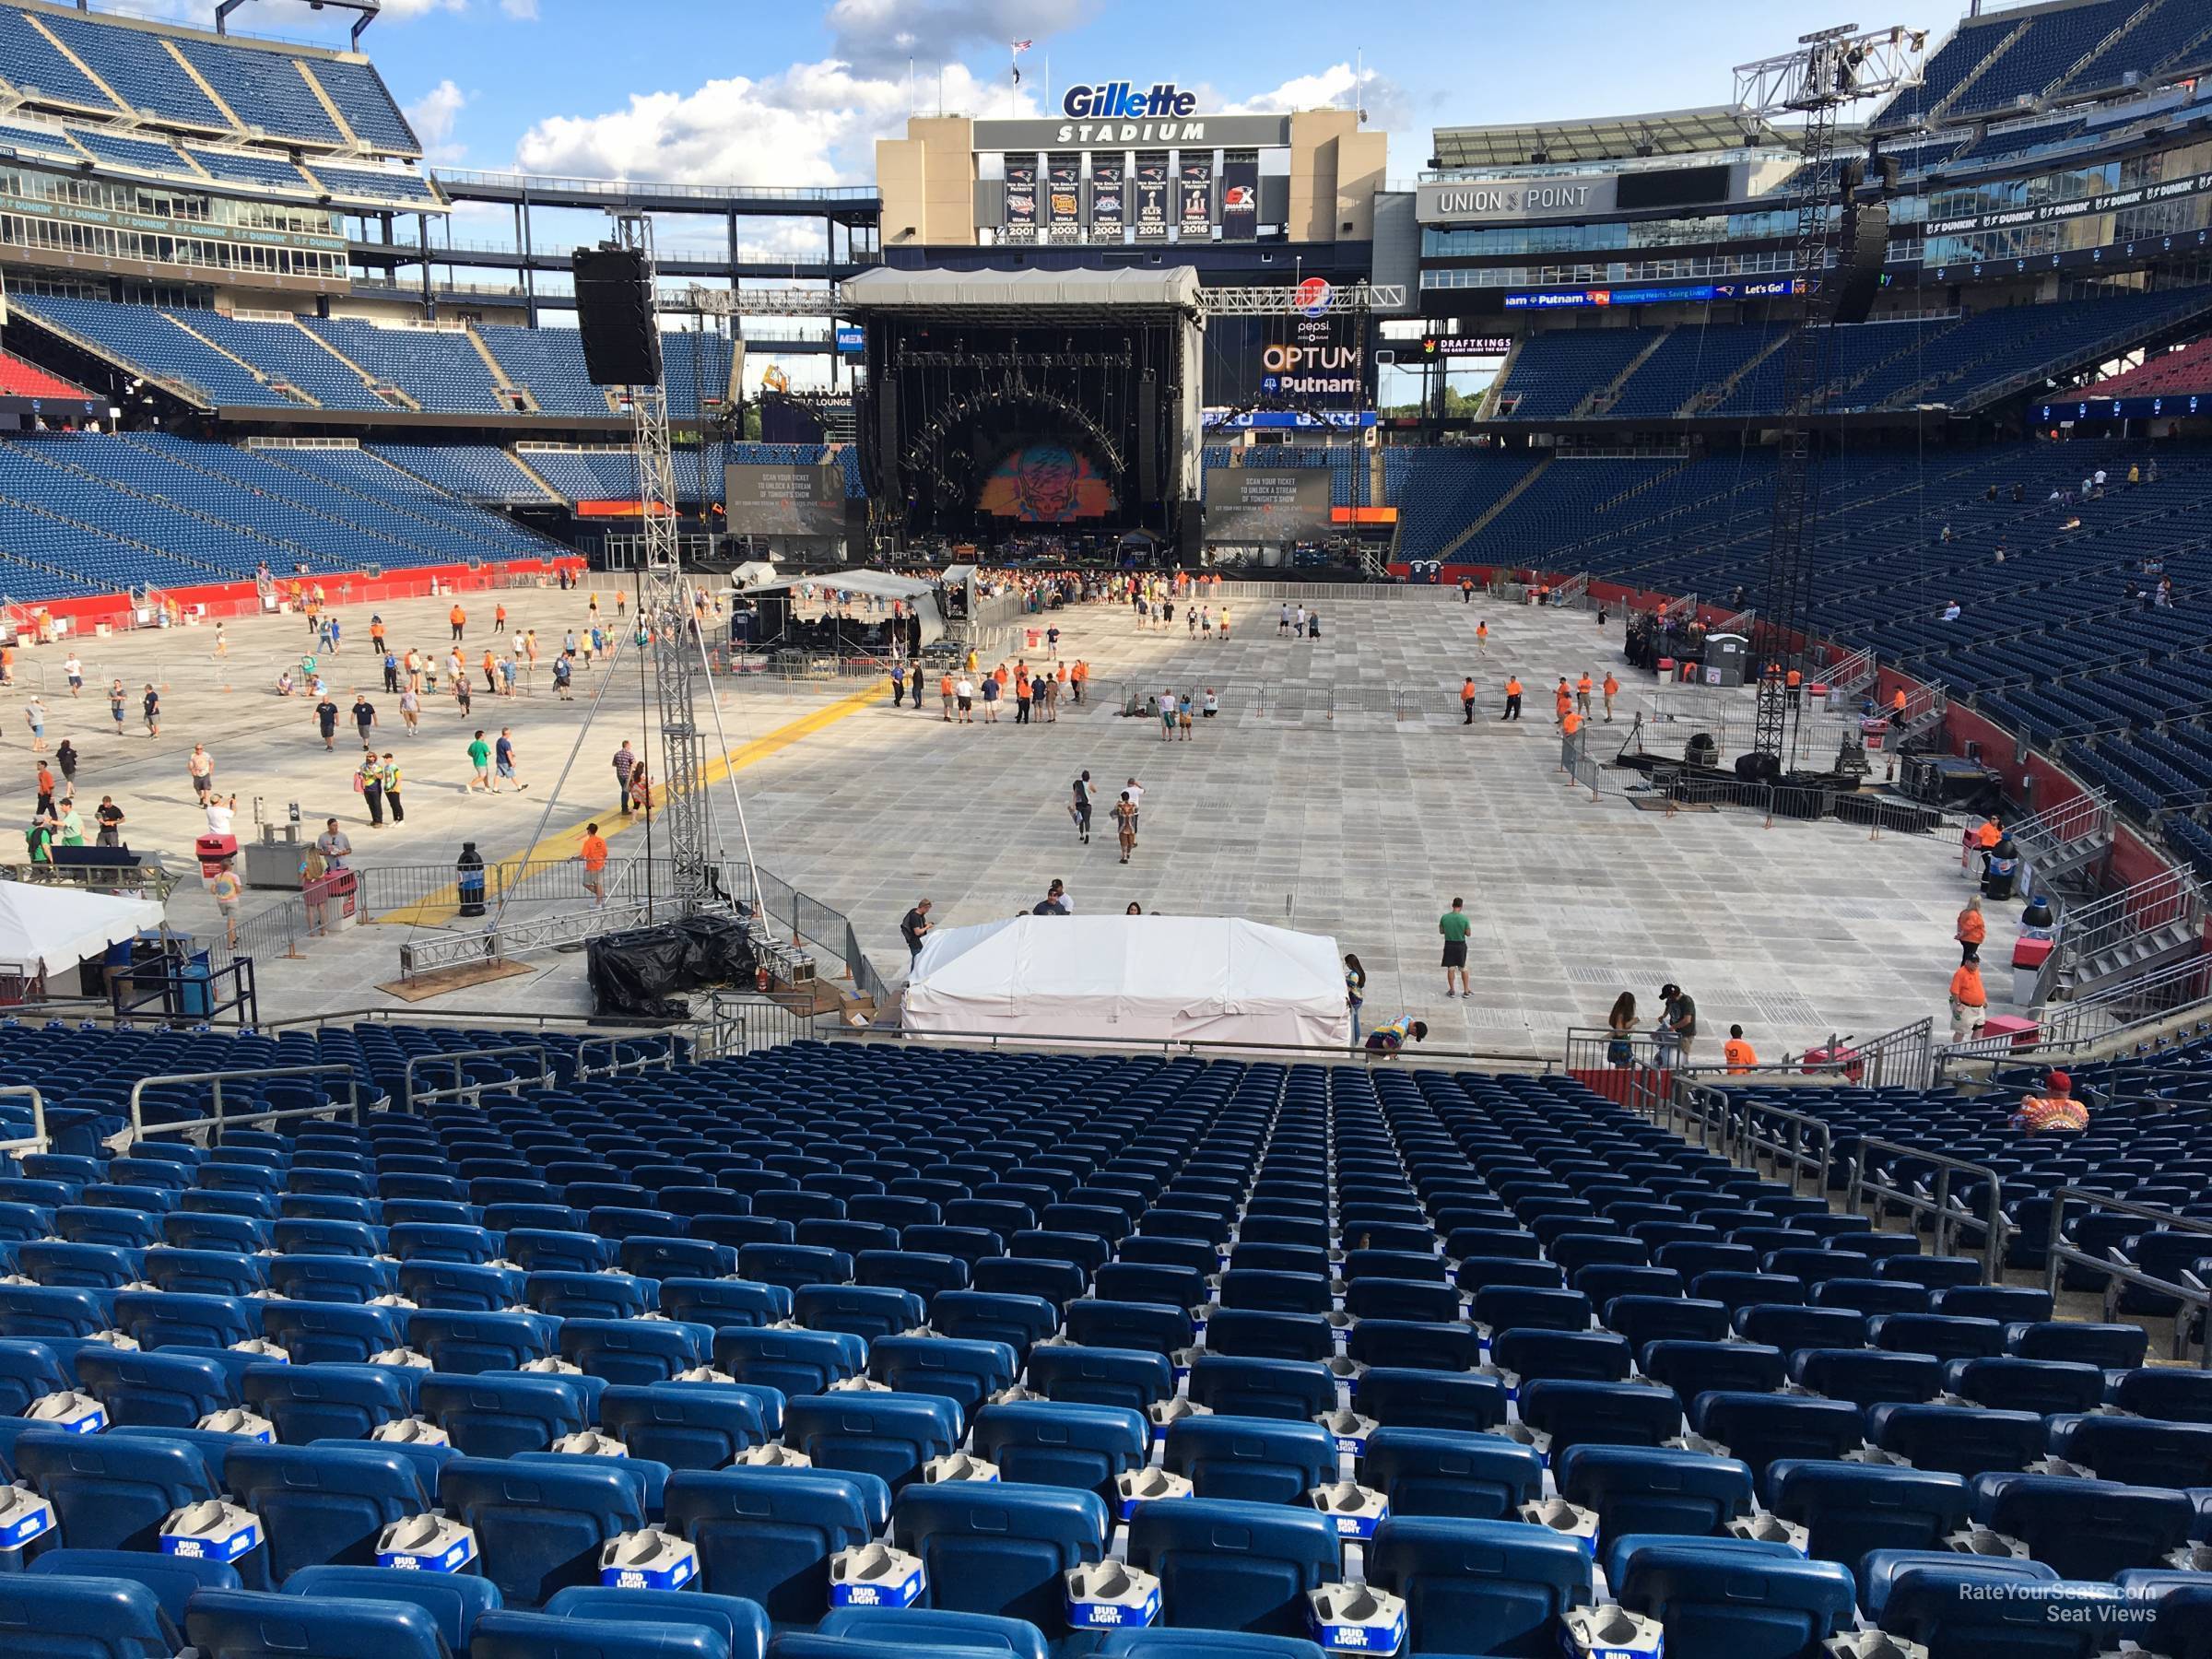 Gillette Stadium Section 141 Concert Seating - RateYourSeats.com